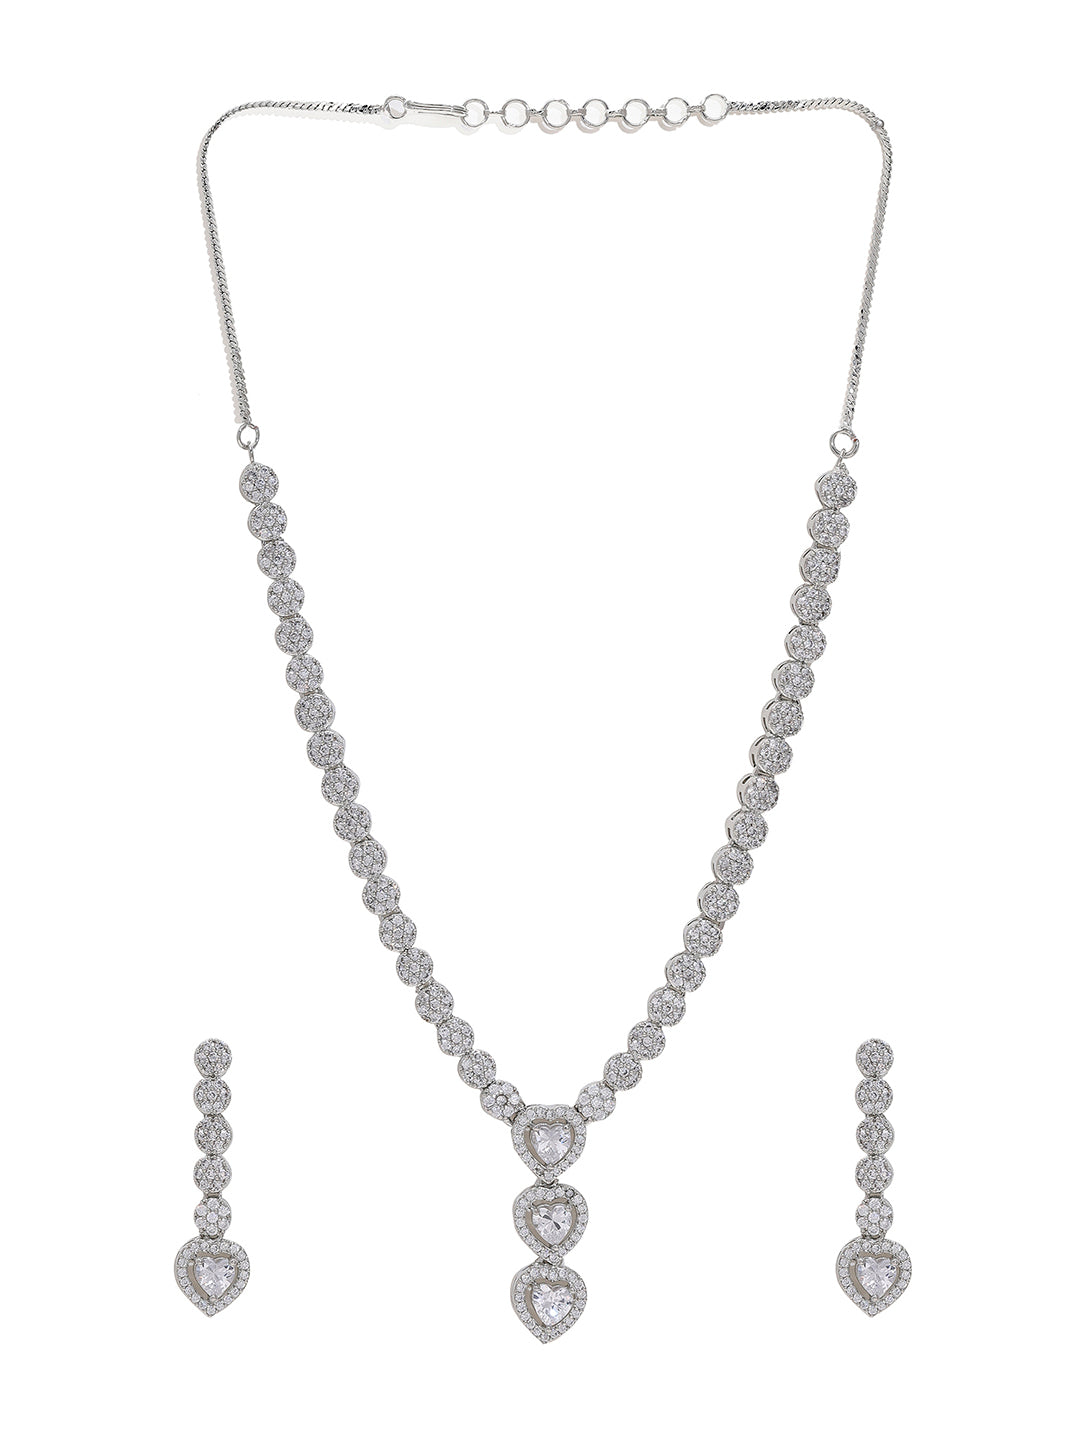 Priyaasi Sterling Silver Plated American Diamond Jewelry Set with Heart-Shaped Brilliance